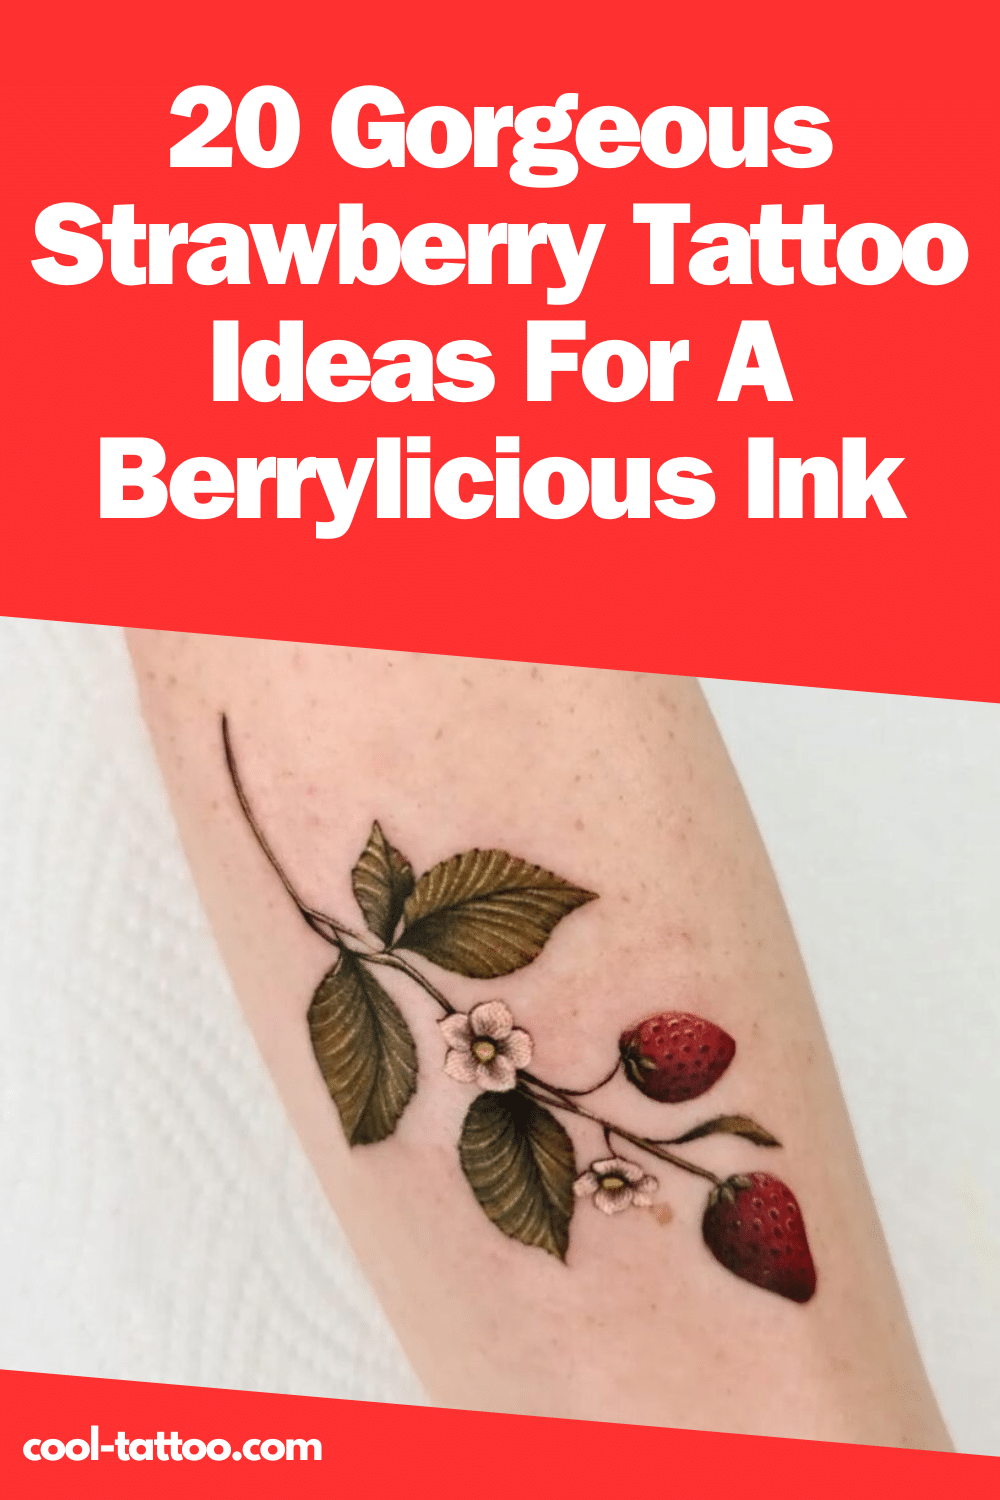 20 Gorgeous Strawberry Tattoo Ideas For A Berrylicious Ink